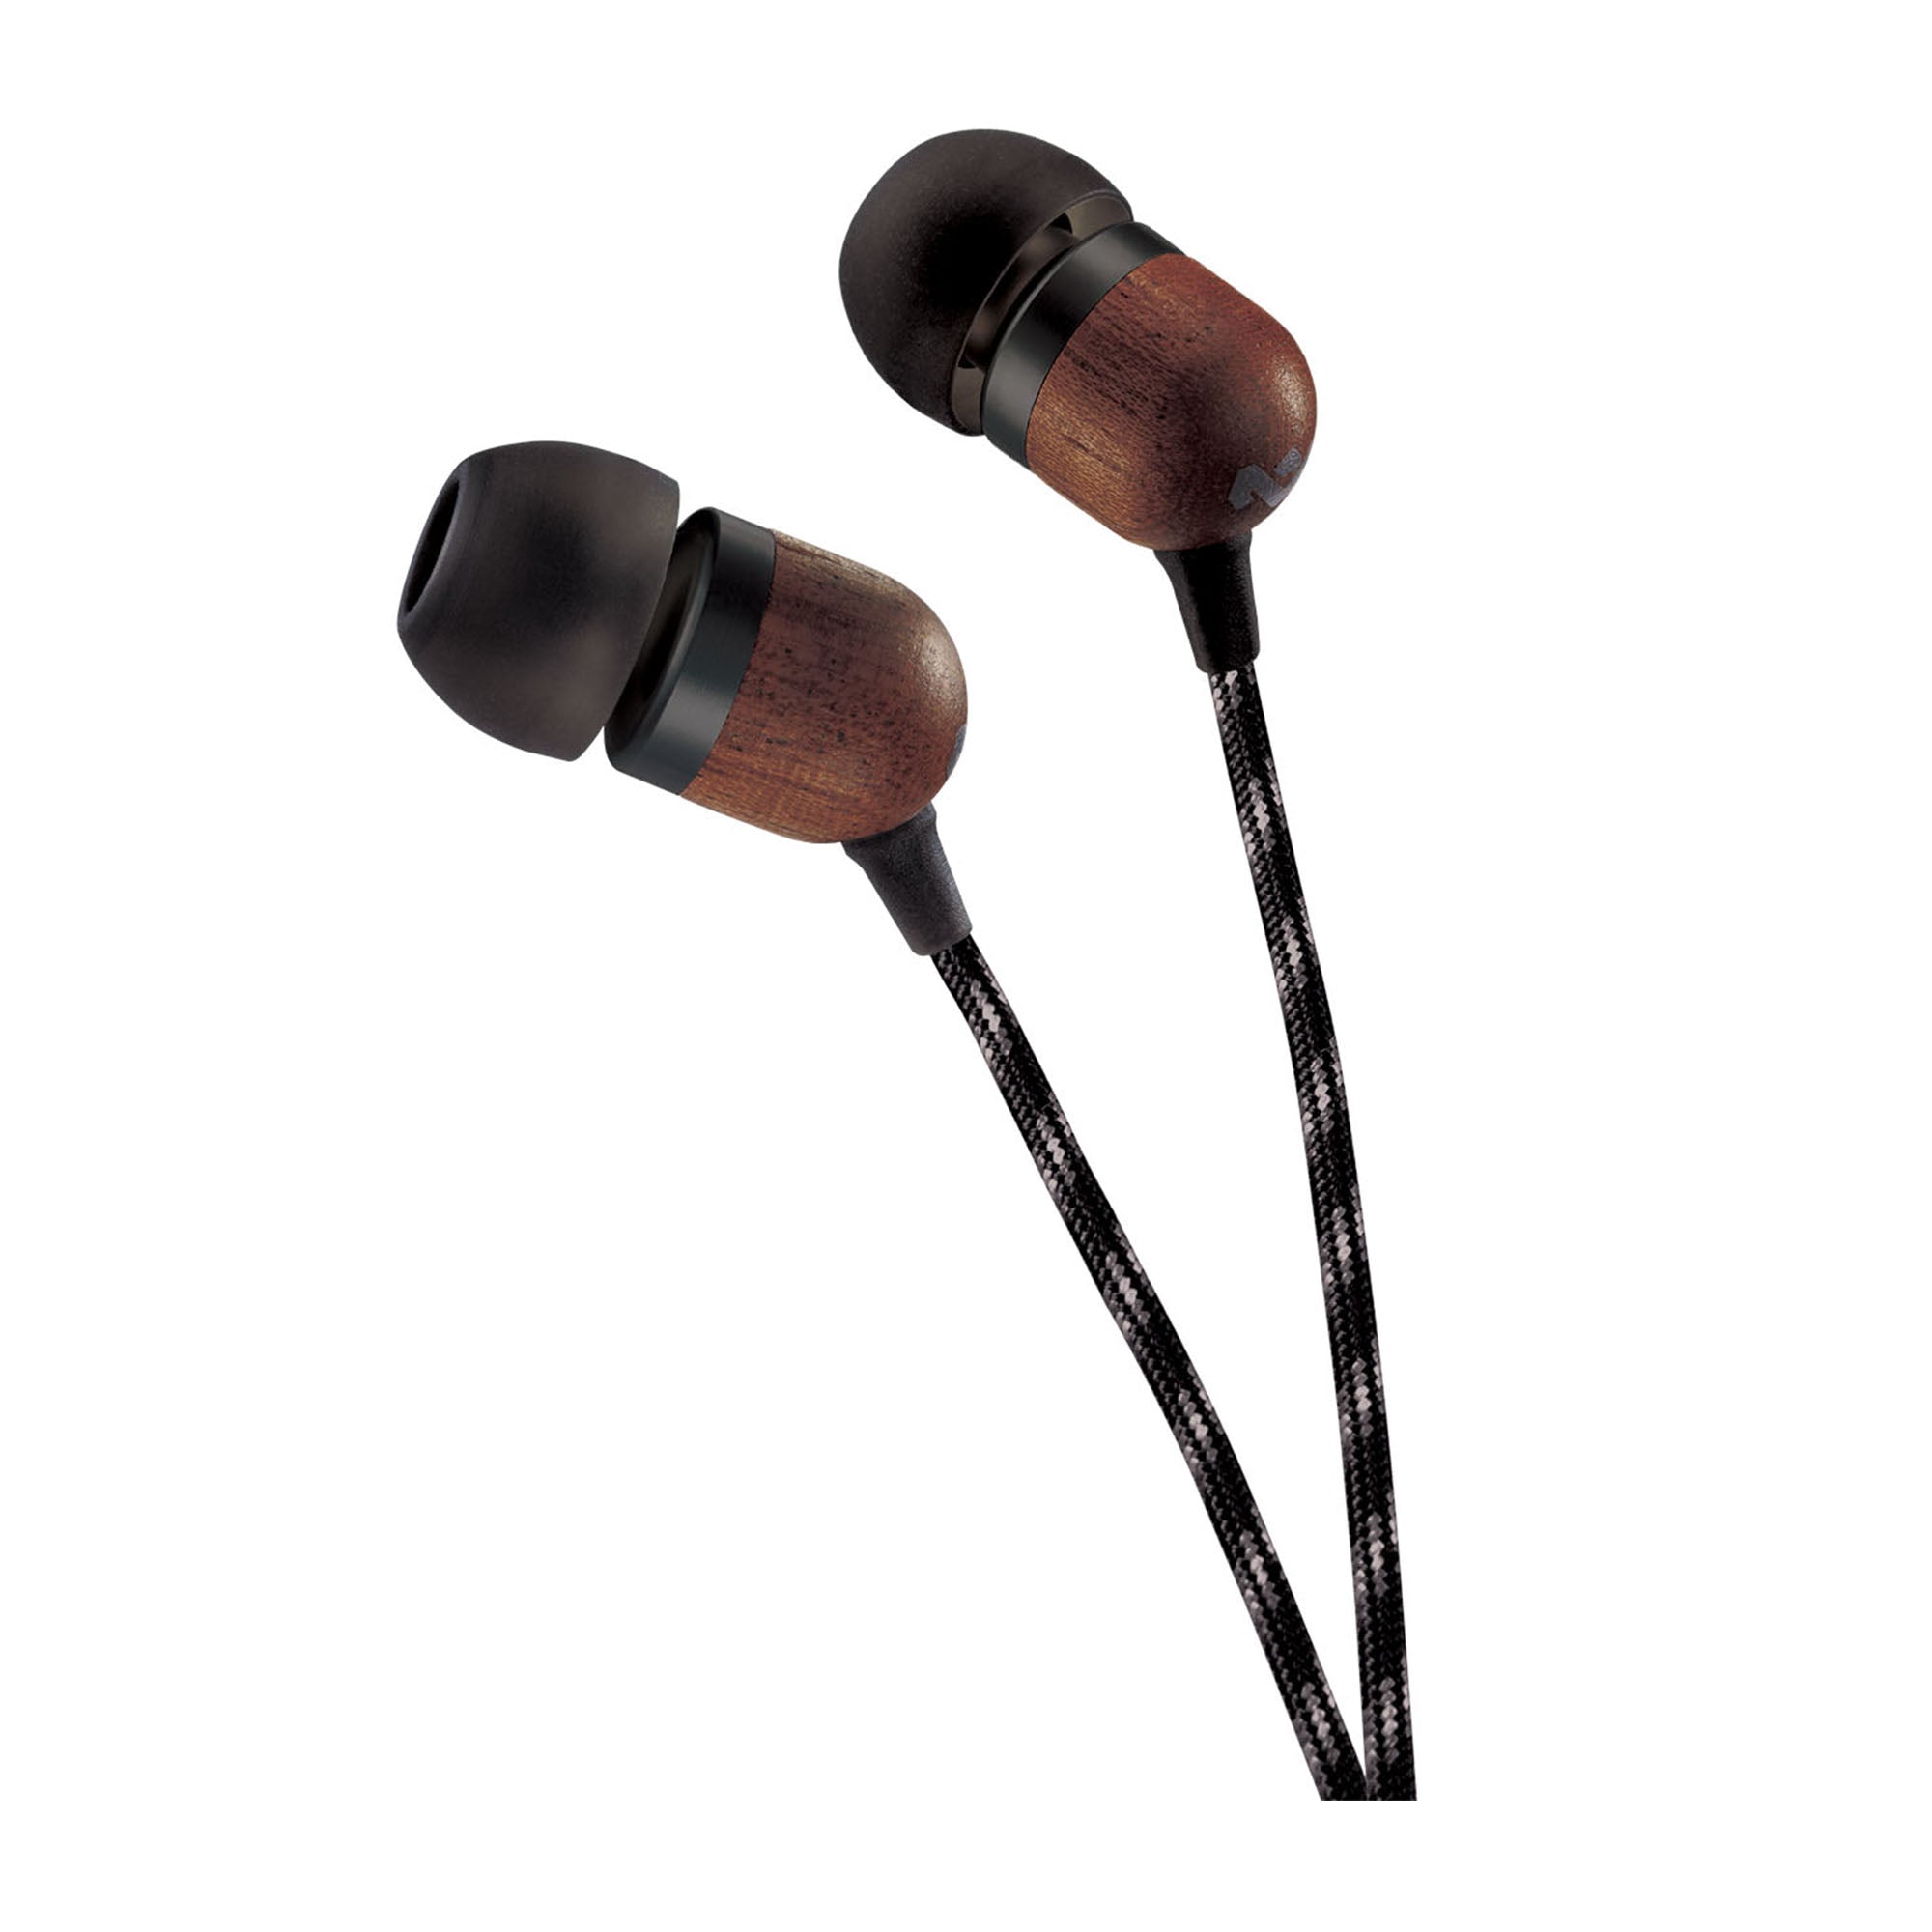 House of Marley Signature Black Smile Jamaica Earbuds - 15-00789